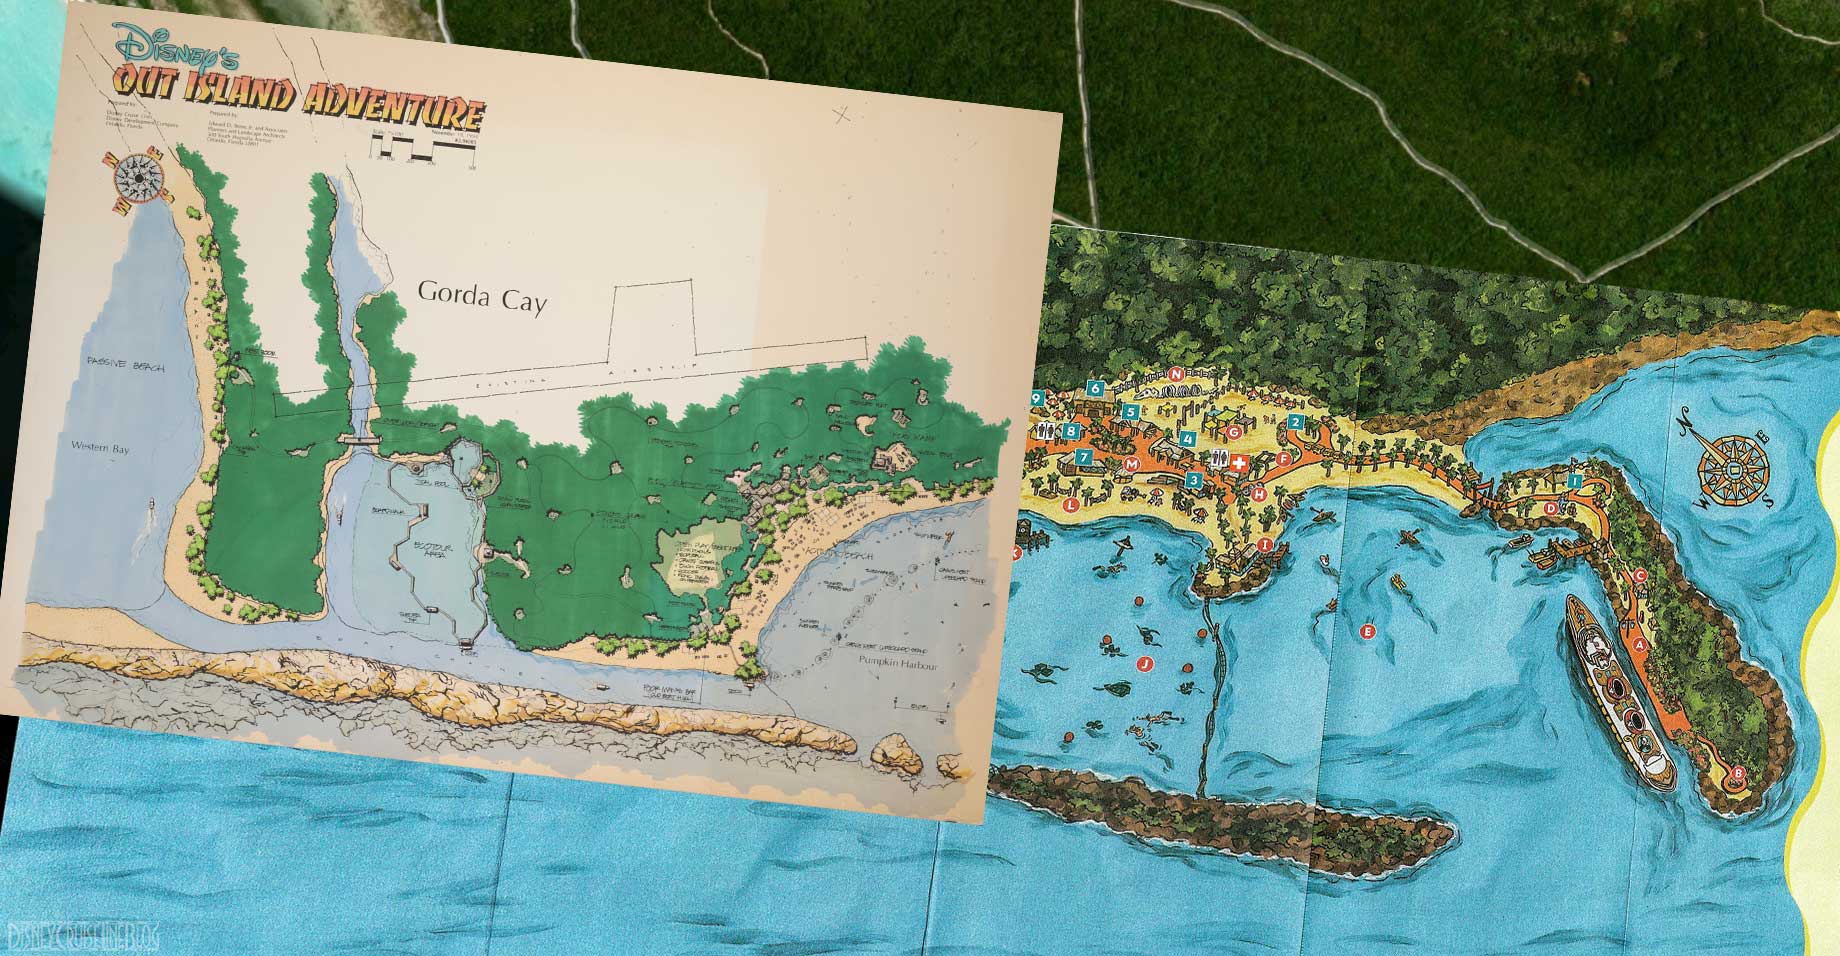 WDI Out Island Adventure Castaway Cay Map Composite